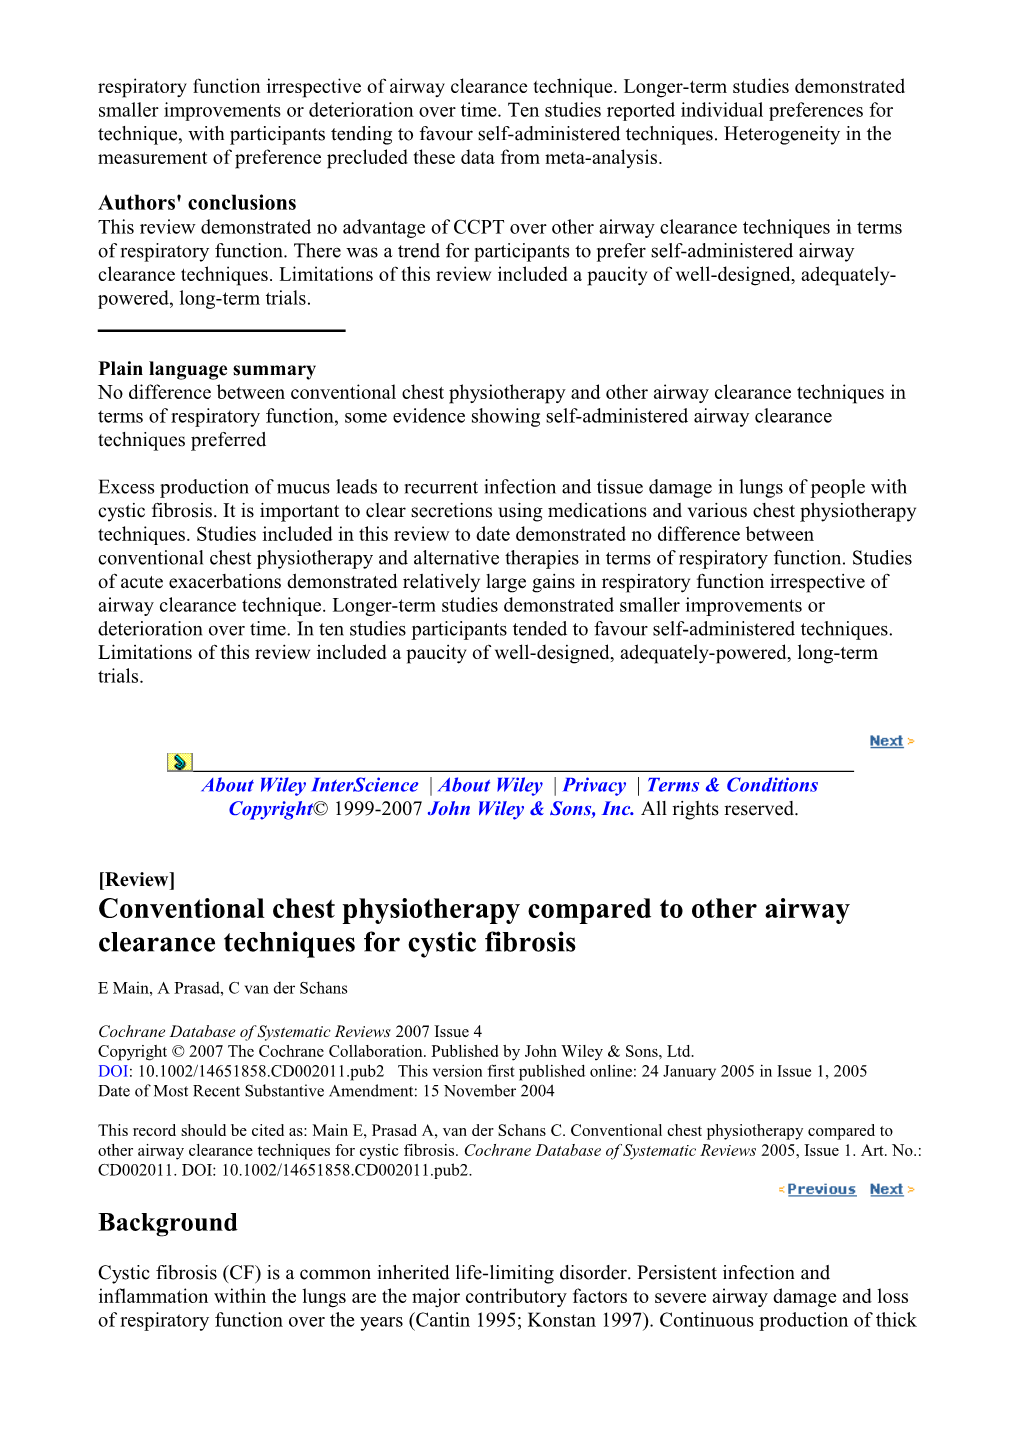 Review Conventional Chest Physiotherapy Compared to Other Airway Clearance Techniques